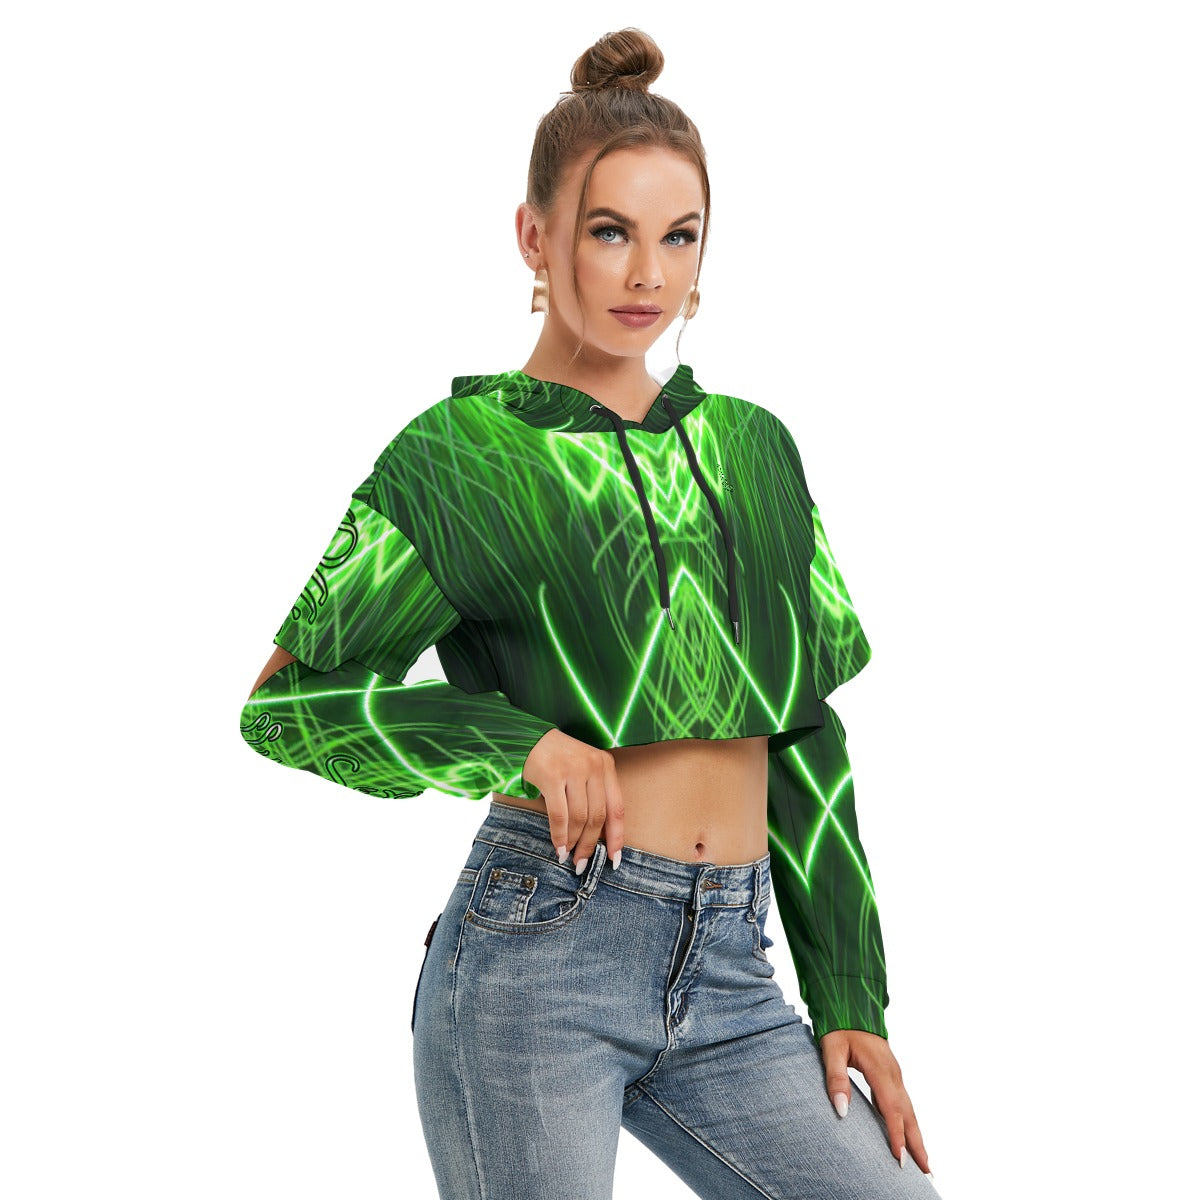 Officially Sexy Neon Green Laser Hearts Collection Women's Heavy Fleece Hoodie With Hollow Out Sleev